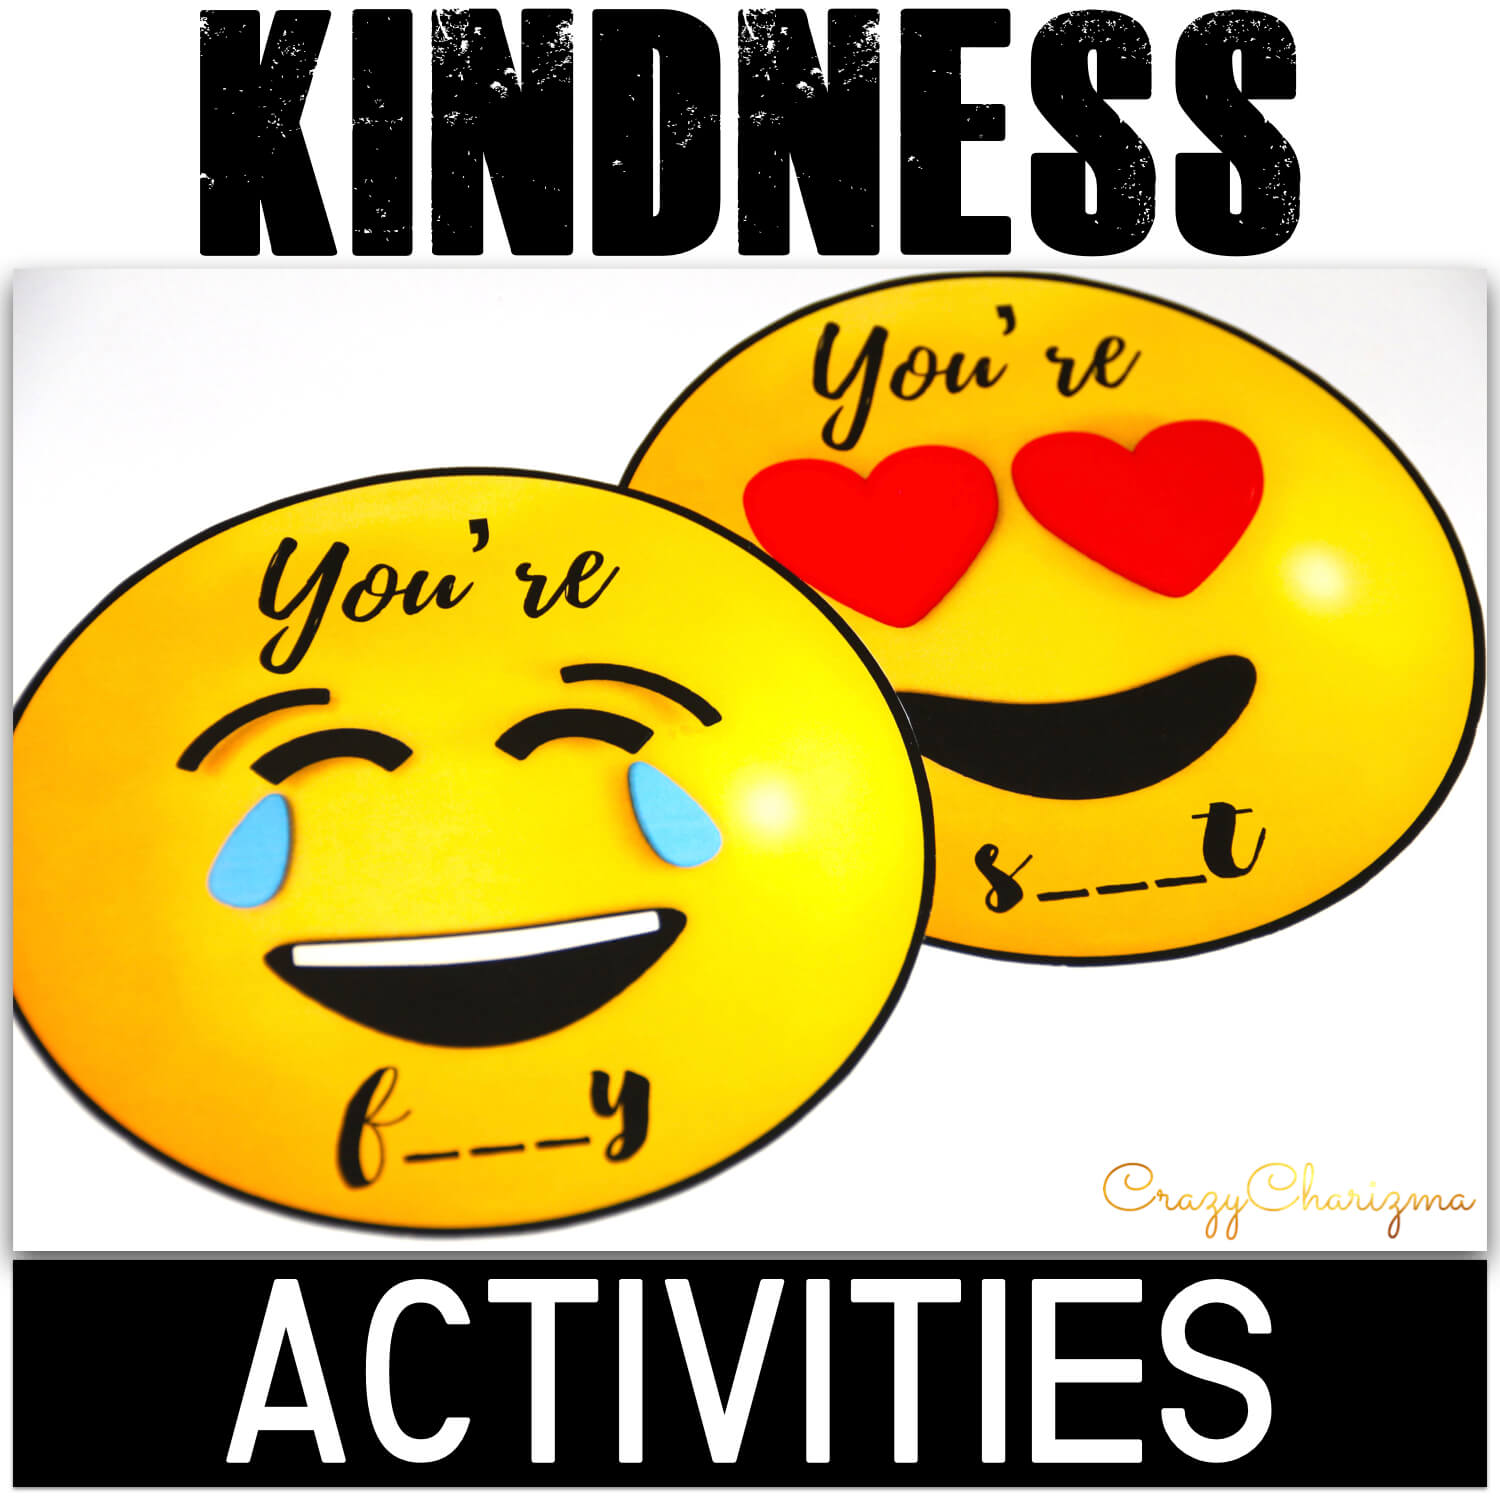 Teach positive character traits with these activities which include emojis craftivity. The main idea is to characterize classmates (compliments activity) and practice writing. Build kindness and rapport in your classroom!